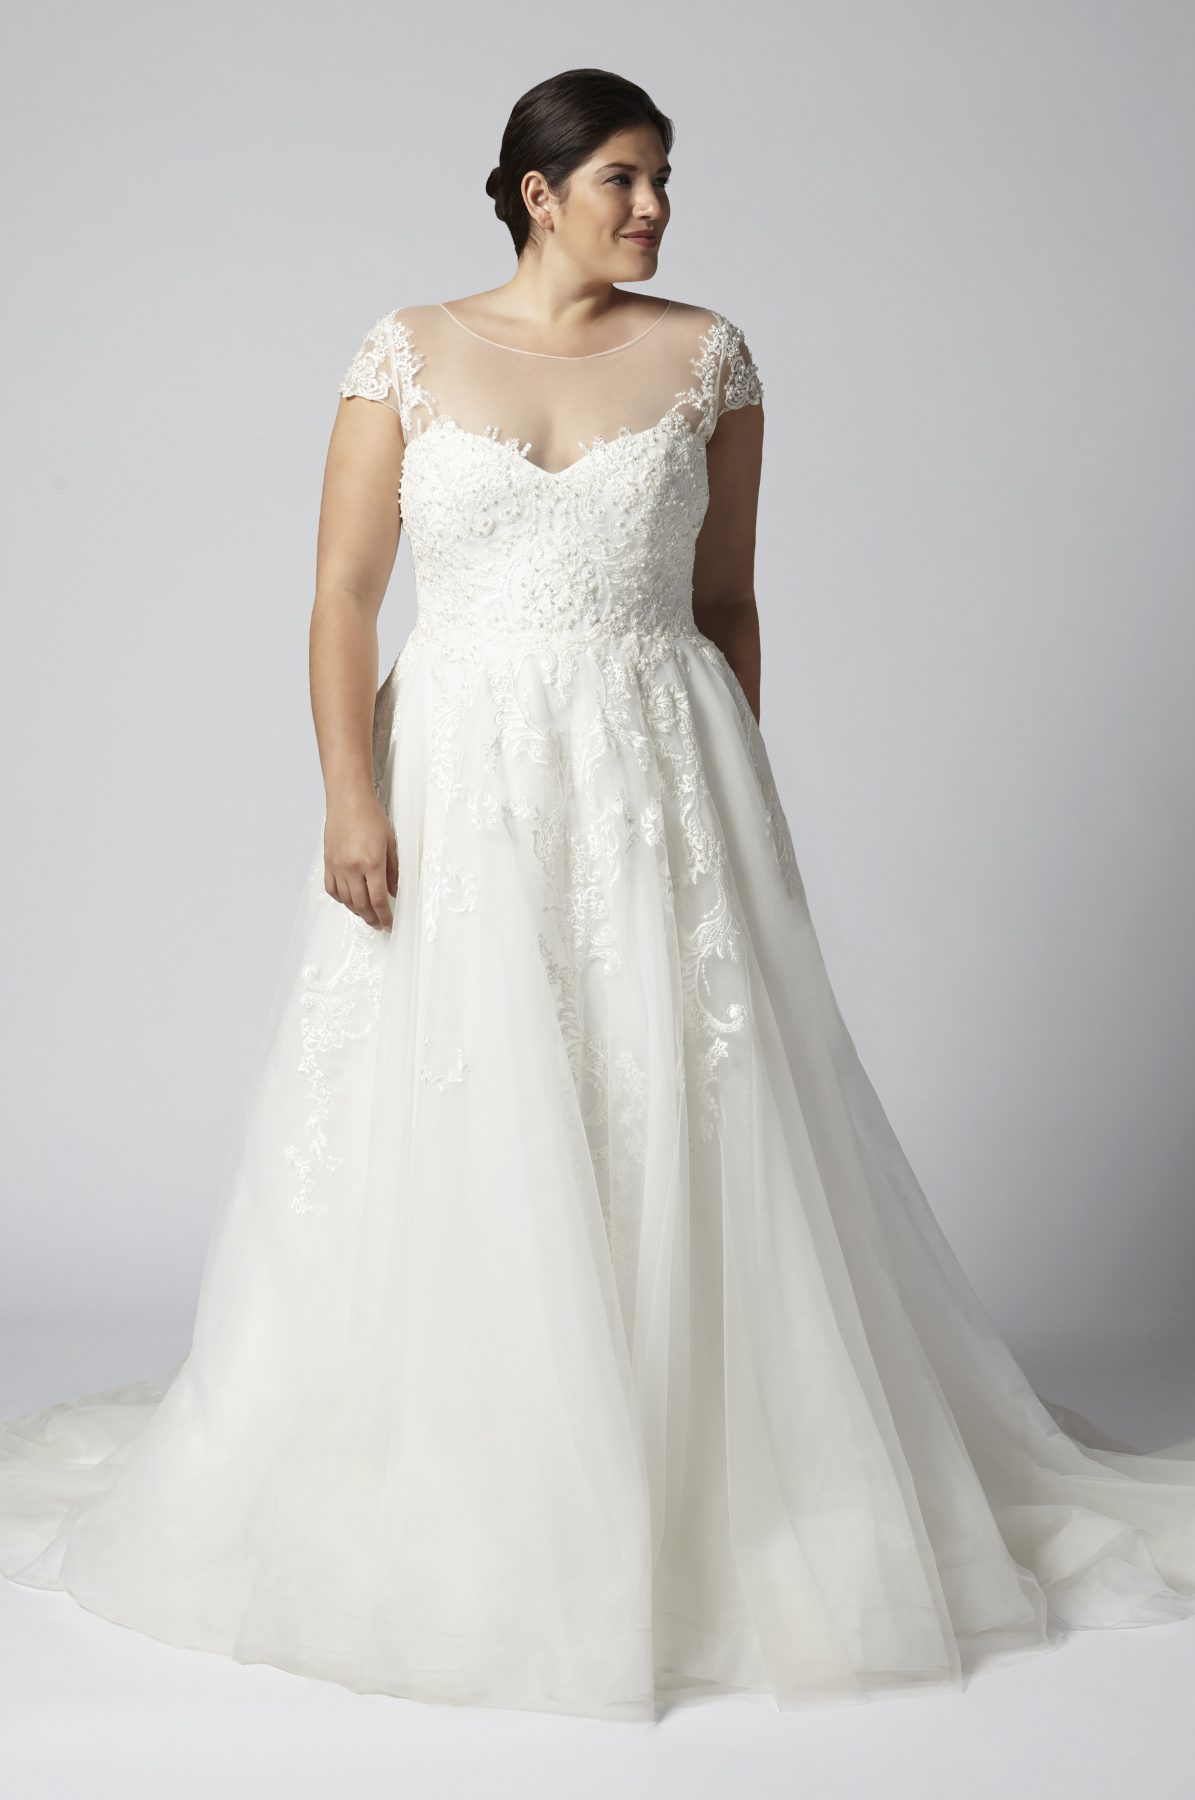 Kleinfeld Bridal carries over 200 plus size wedding dress styles for you to try on—here are our top 8 favorite plus size wedding dresses for the spring and summer 2019 wedding season! Henry Roth Style: DanikaXS